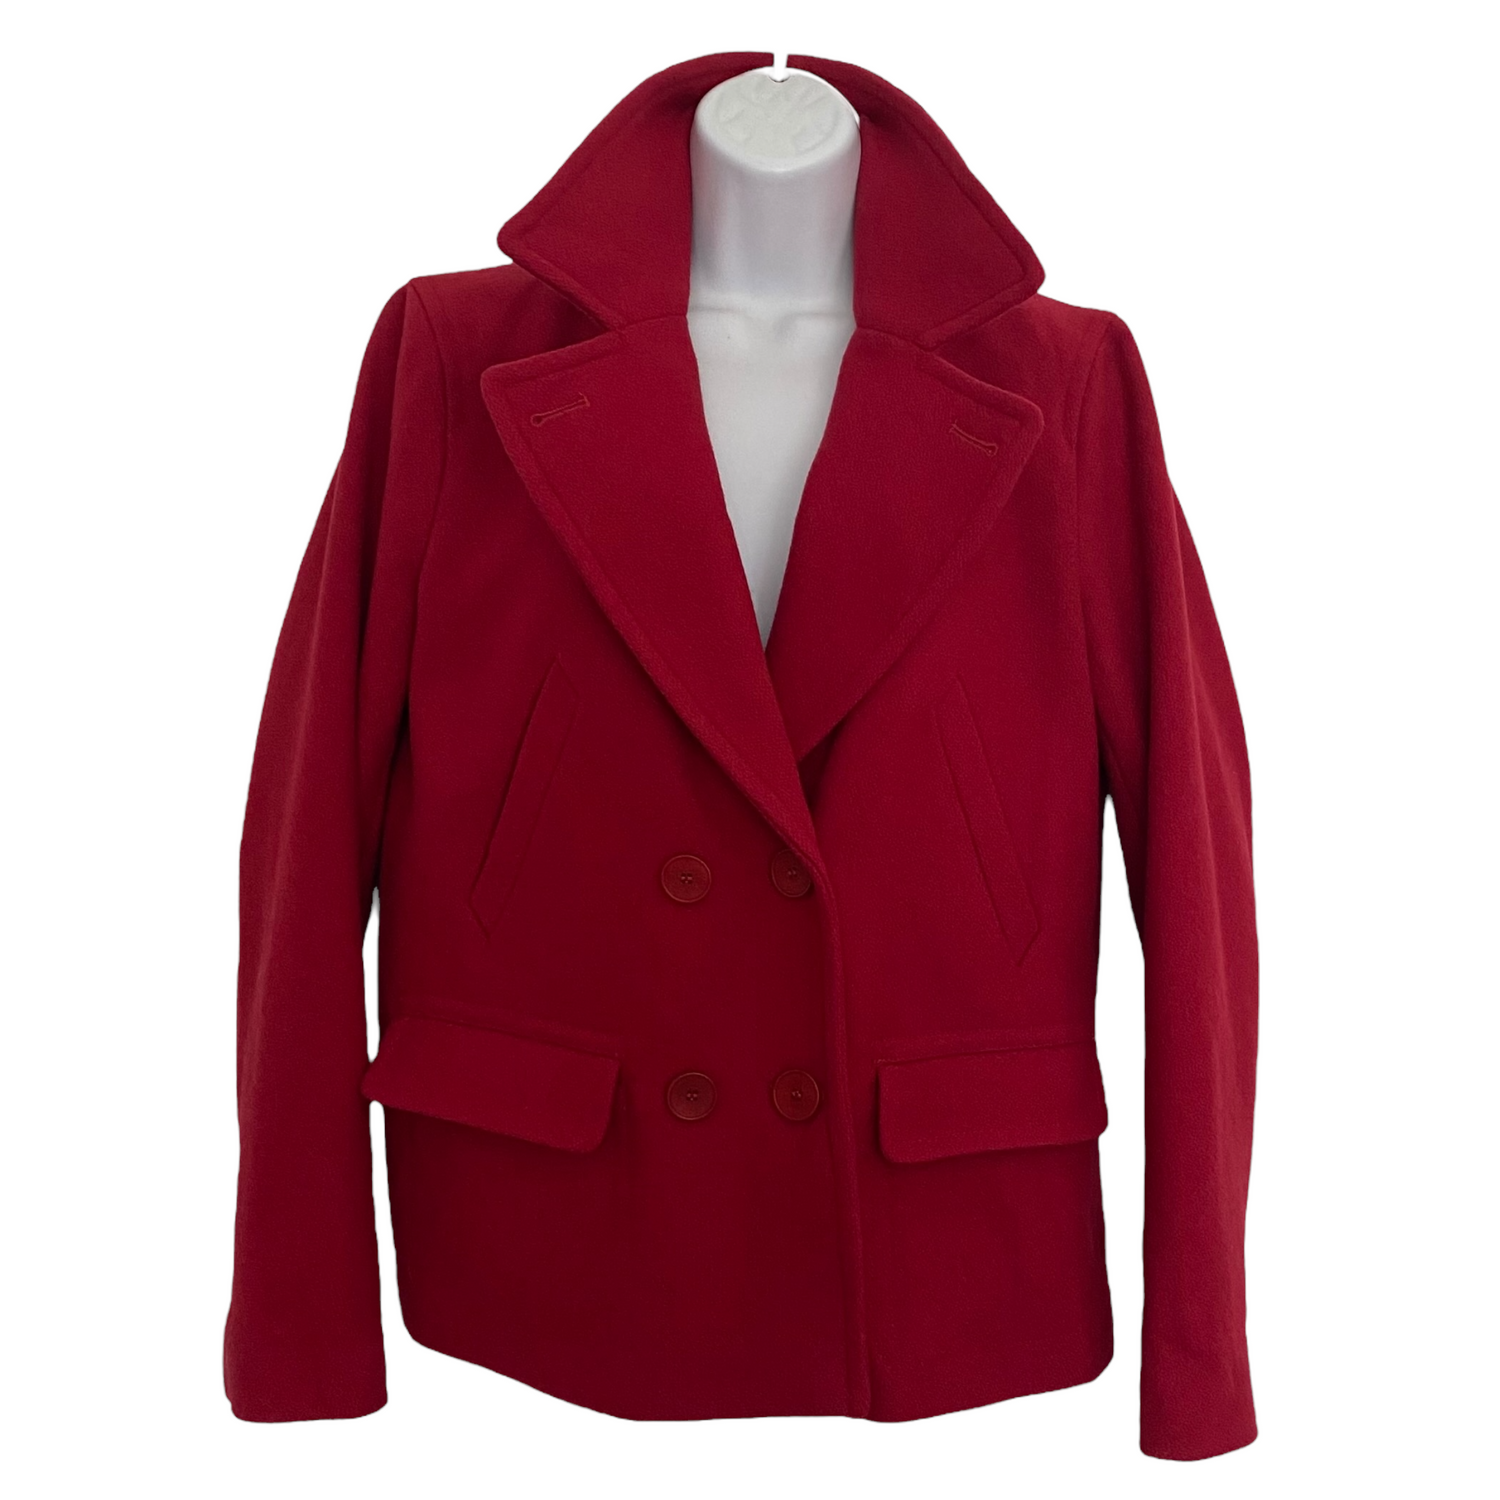 Lacoste Wool Pea Coat Size Small to Medium Red